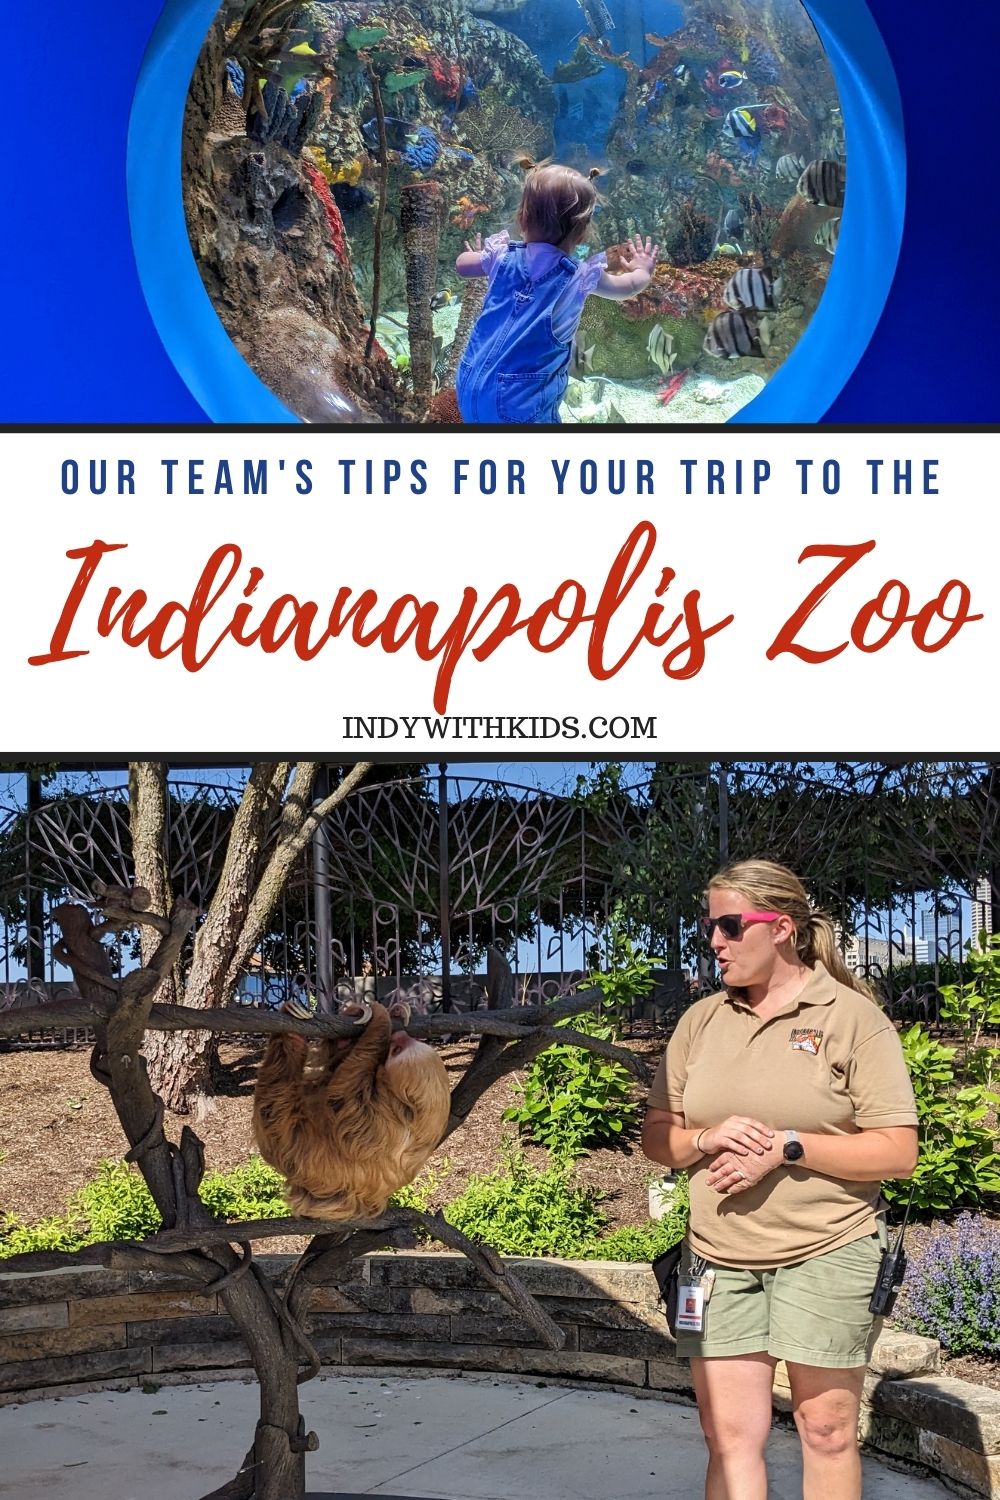 The Indy with Kids team shares tips for visiting the Indianapolis Zoo.